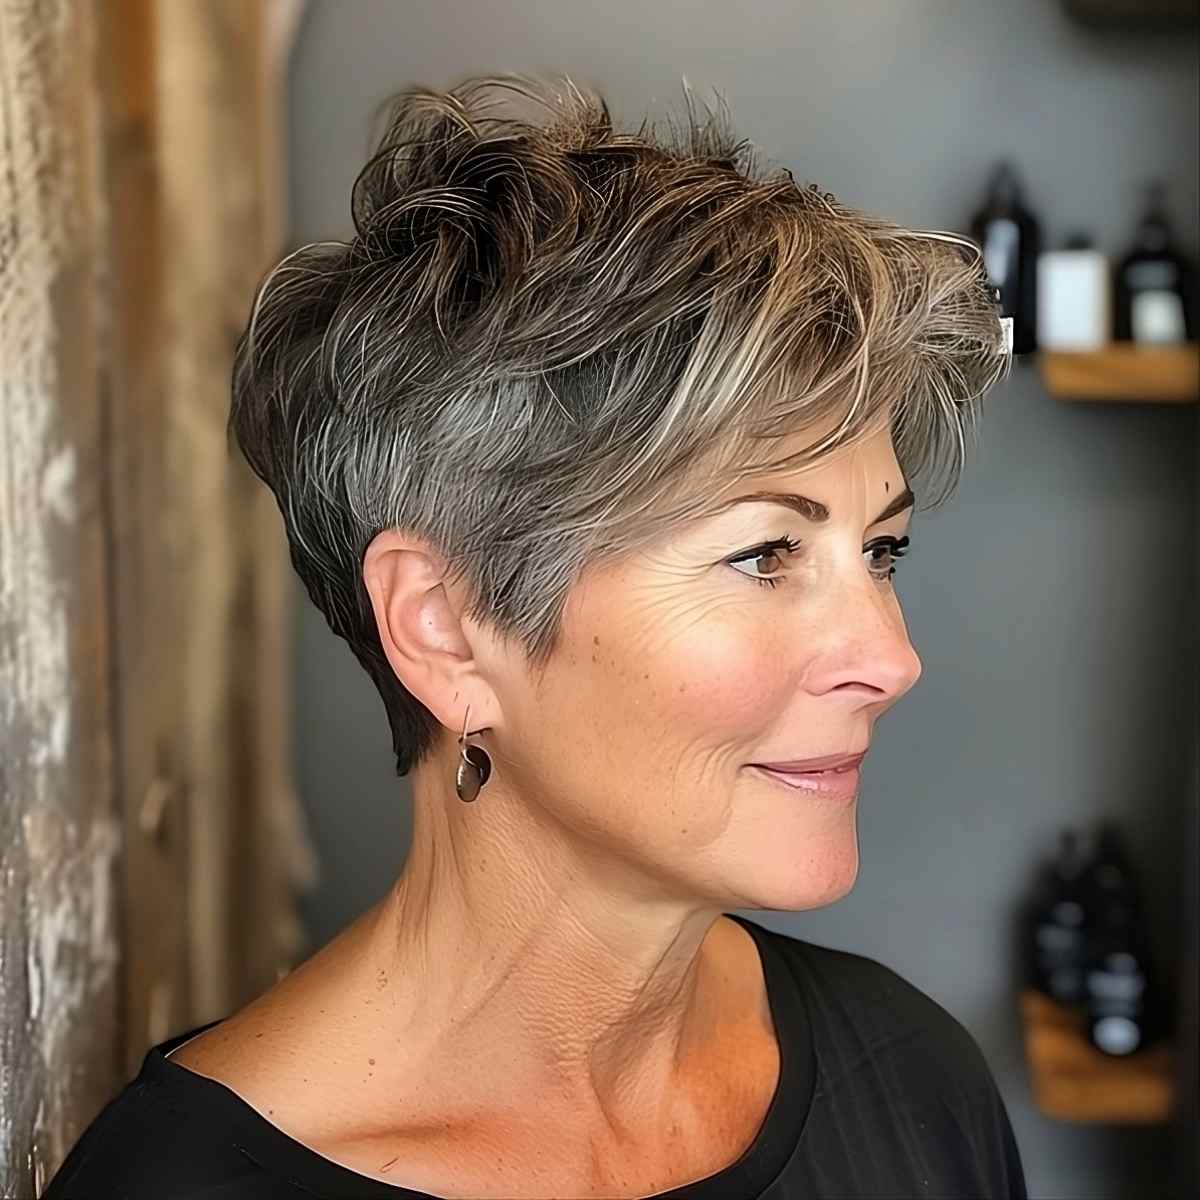 Stylish Texture for Women Over 50 with thin hair